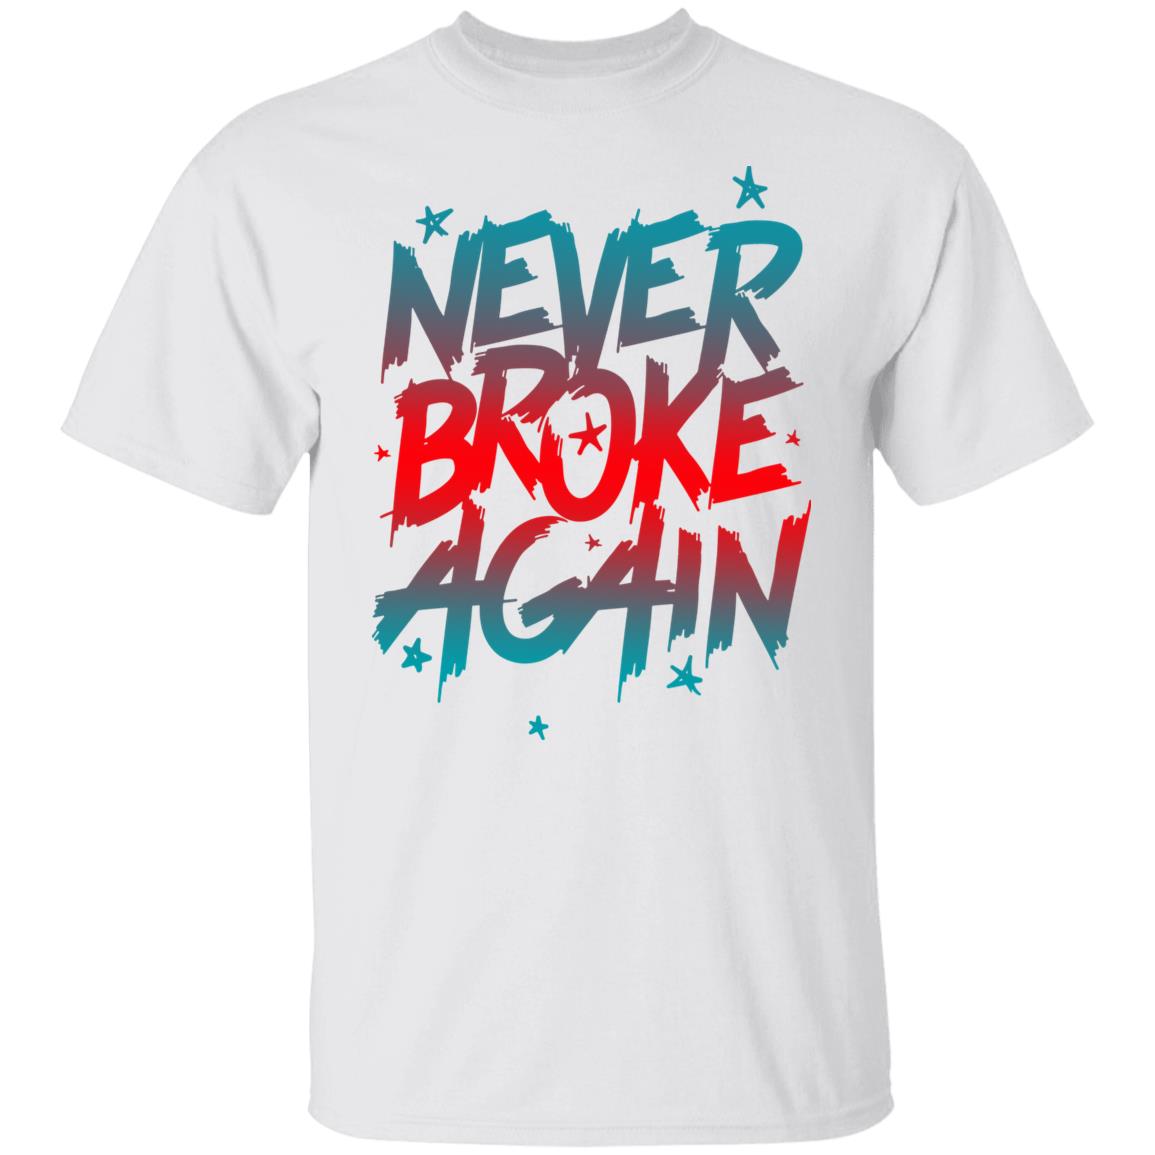 Never Broke Again Faded Blue Red T-Shirt
#NeverBrokeAgain #FadedBlueRed #Streetwear #FashionTrends #USFashion #TrendyApparel #LimitedEdition #UrbanStyle #NBAFashion #PopularClothing #StreetStyle #USFashionTrends

tipatee.com/product/never-…